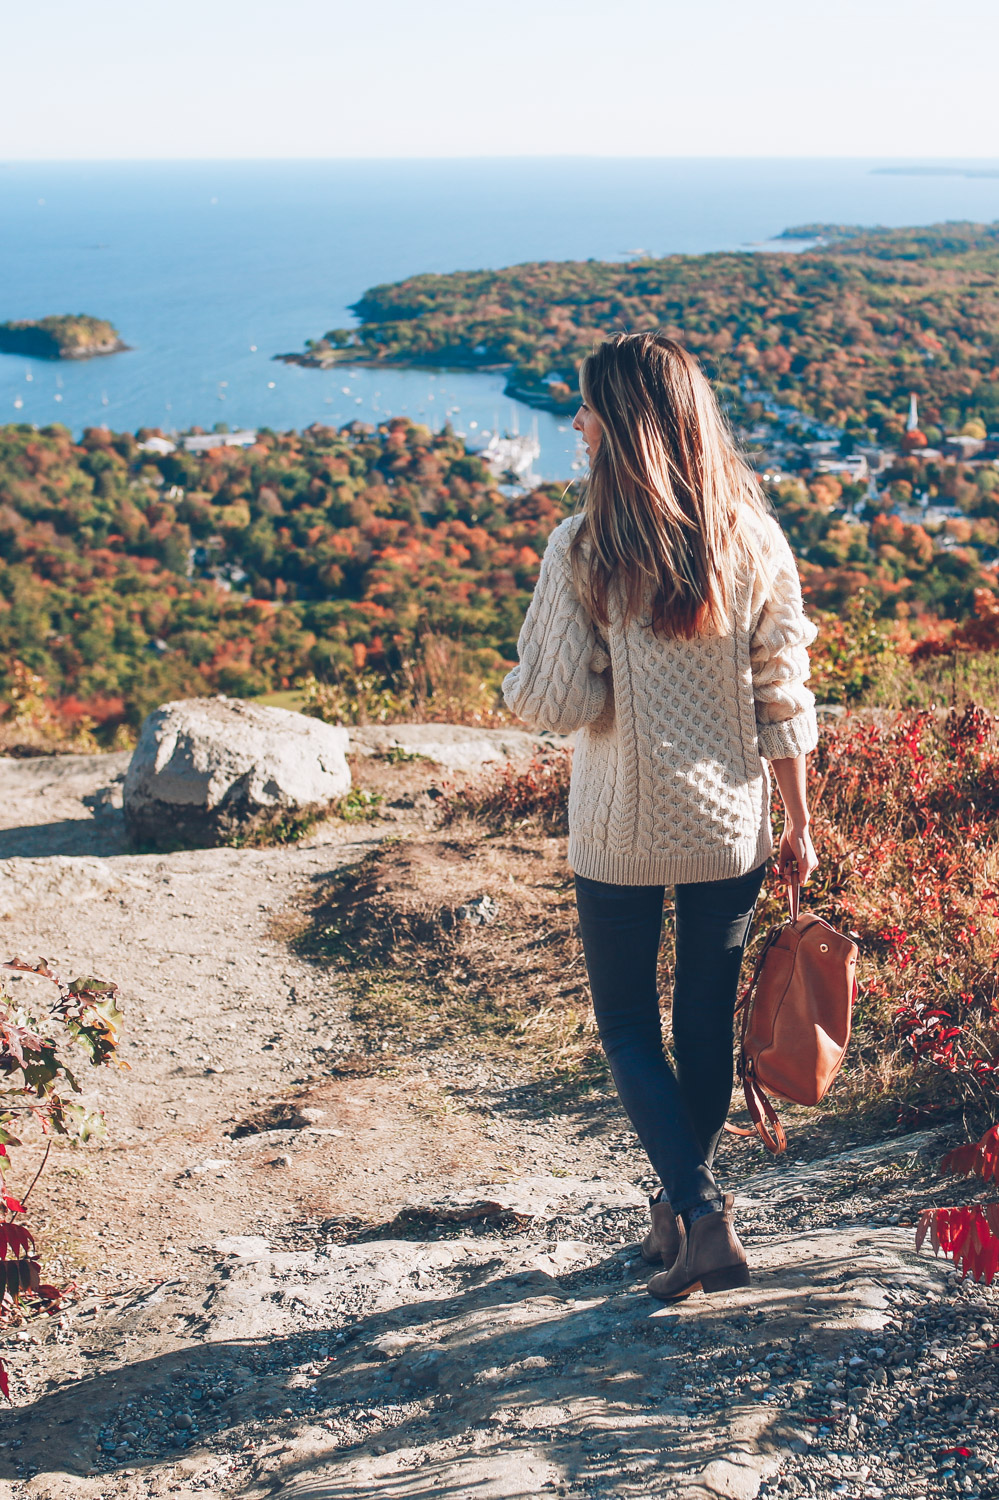 Jess Ann Kirby overlooks the harbour in Camden, Maine for a view of fall foliage.